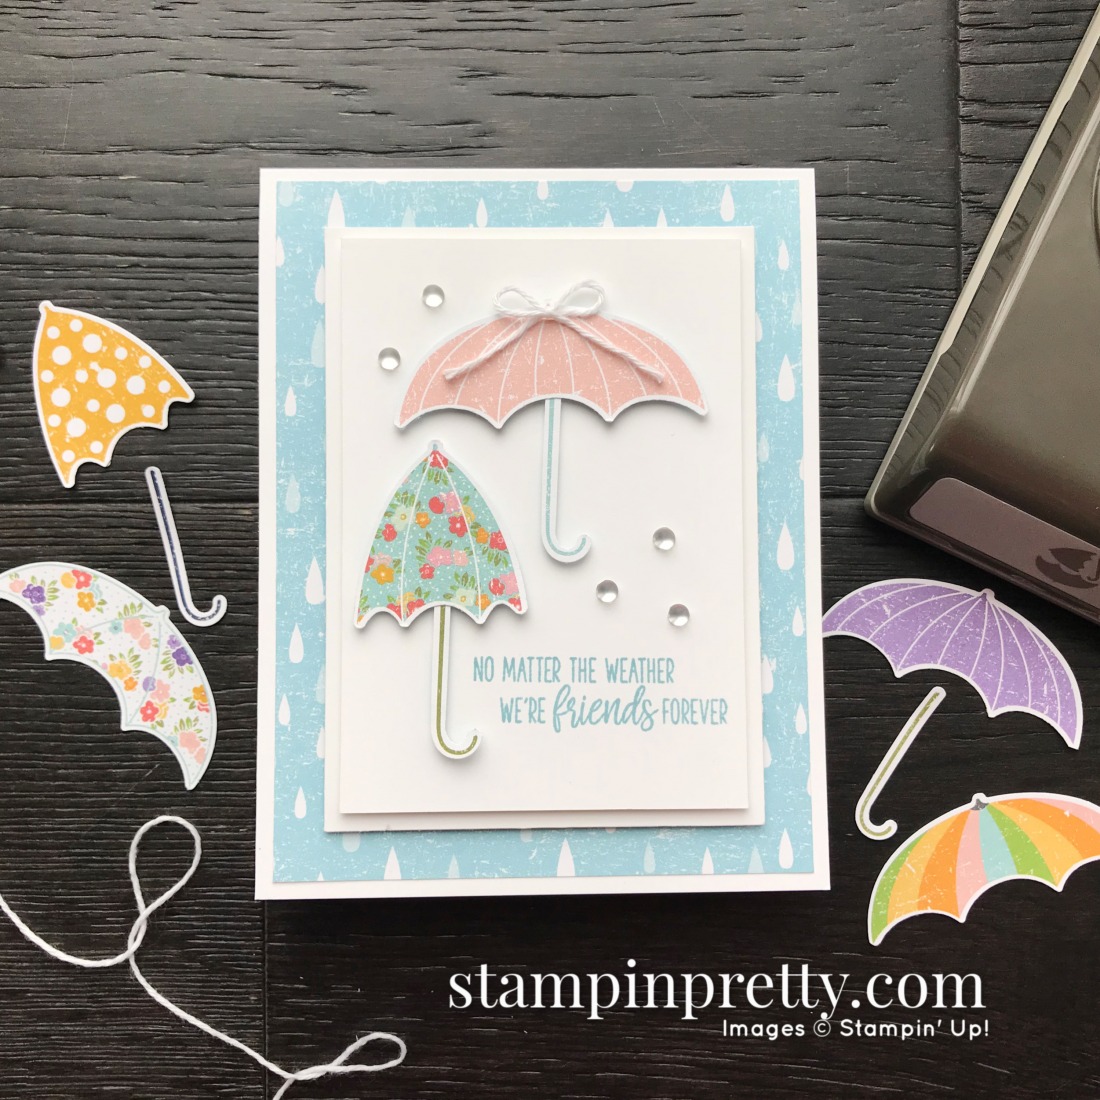 Under My Umbrella Bundle Product Coordination from Stampin' Up! Card by Mary Fish, Stampin' Pretty